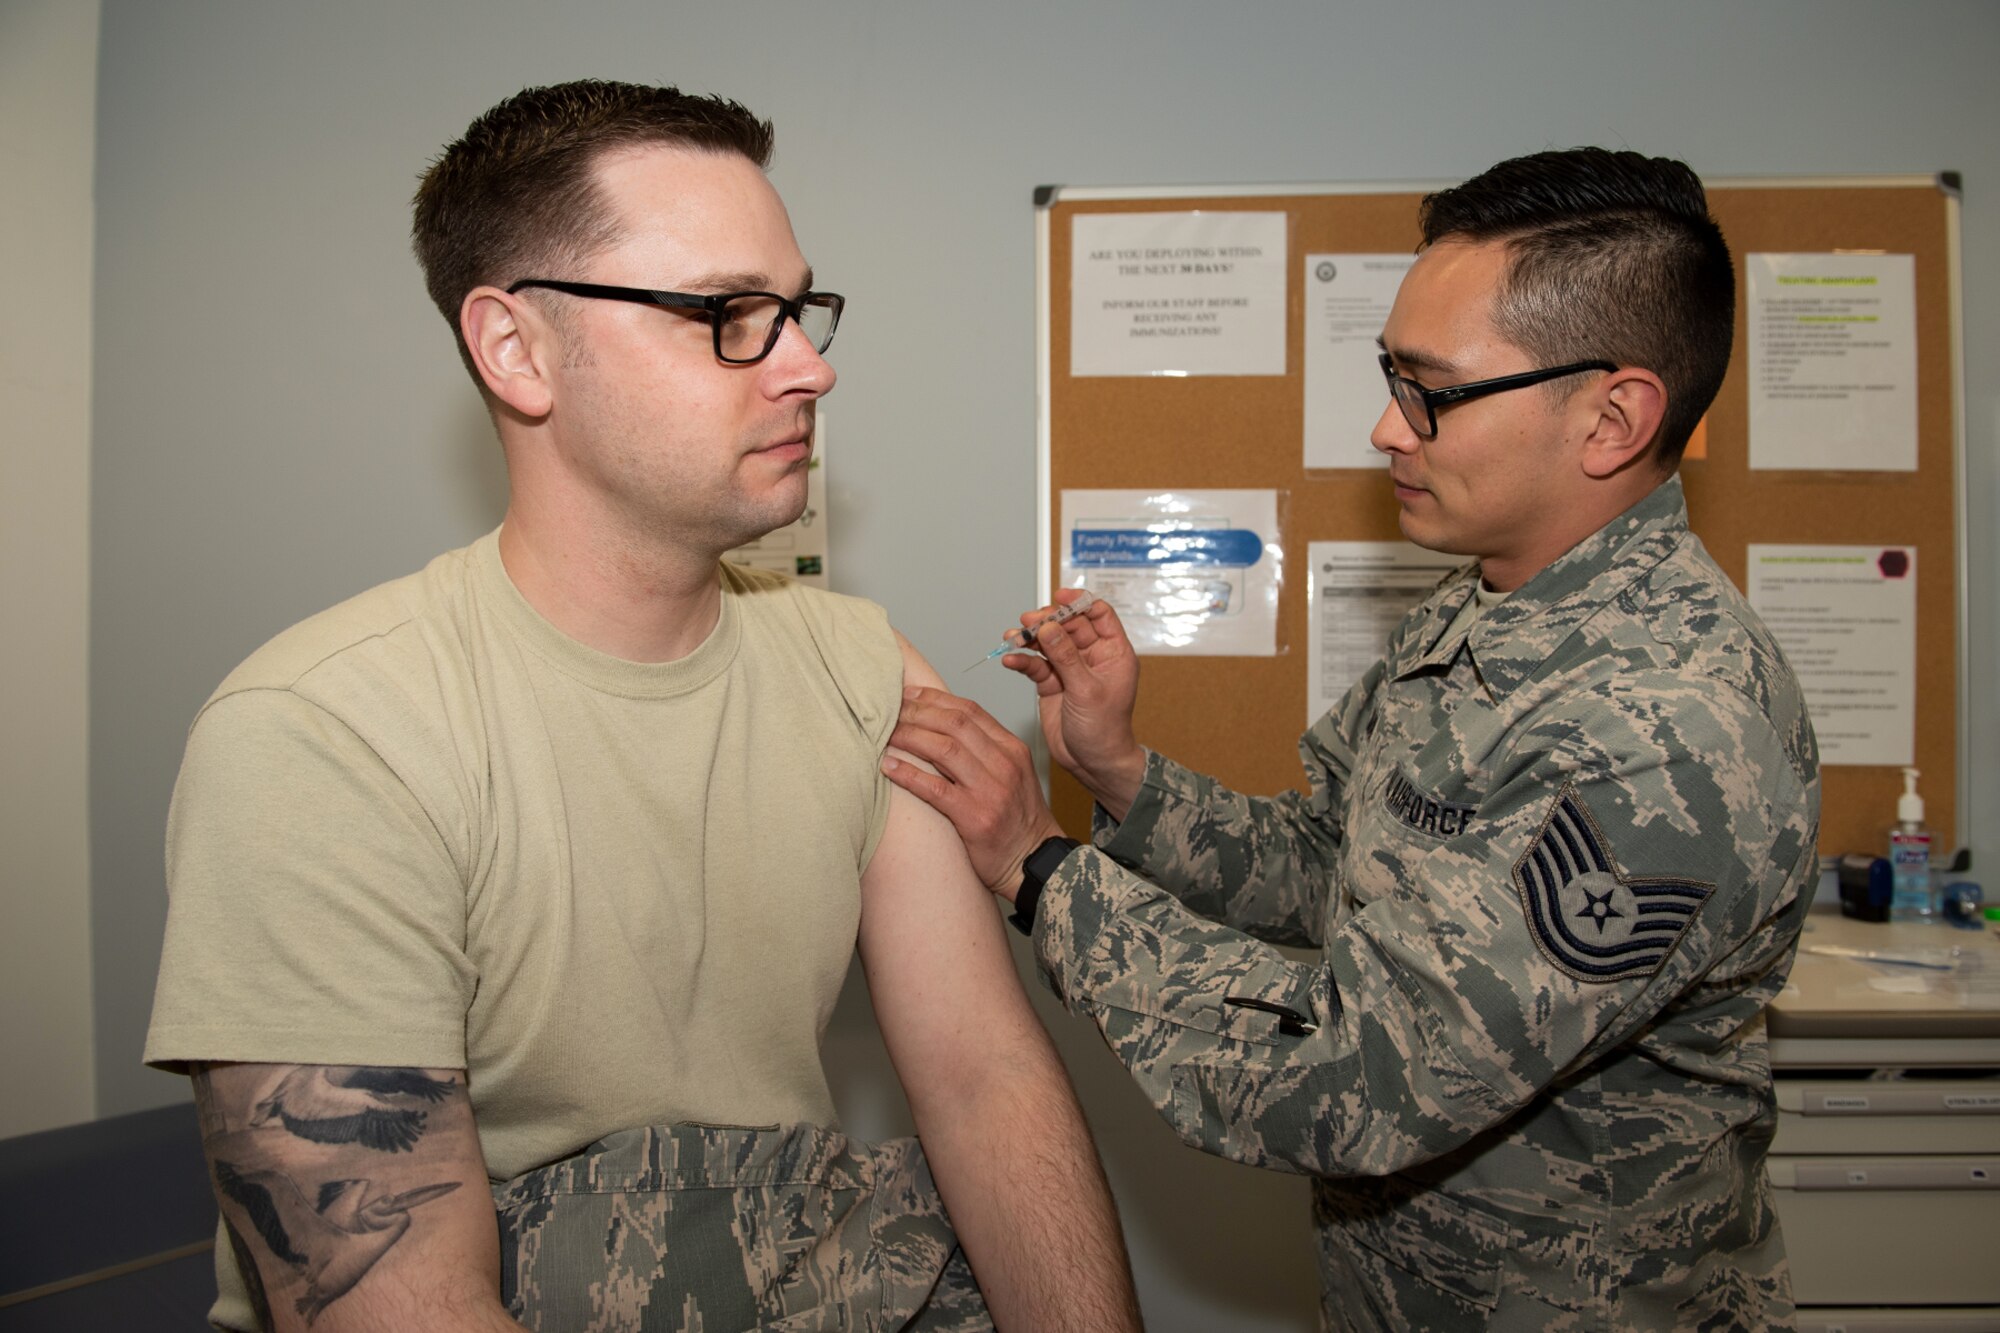 U.S Air Force Tech. Sgt. Ben Axman, 184th Medical Group aerospace medical technician, assigned to McConnell Air Force Base, Kan., practices medical procedures with Tech. Sgt. Robert Bell, 184th Medical Group medical technician, at RAF Alconbury, England, April 16, 2019. The 184th MDG worked closely with medical units at RAF Alconbury, RAF Croughton and RAF Lakenheath to improve total force medical capabilities. (U.S. Air Force photo by Airman 1st Class Jennifer Zima)